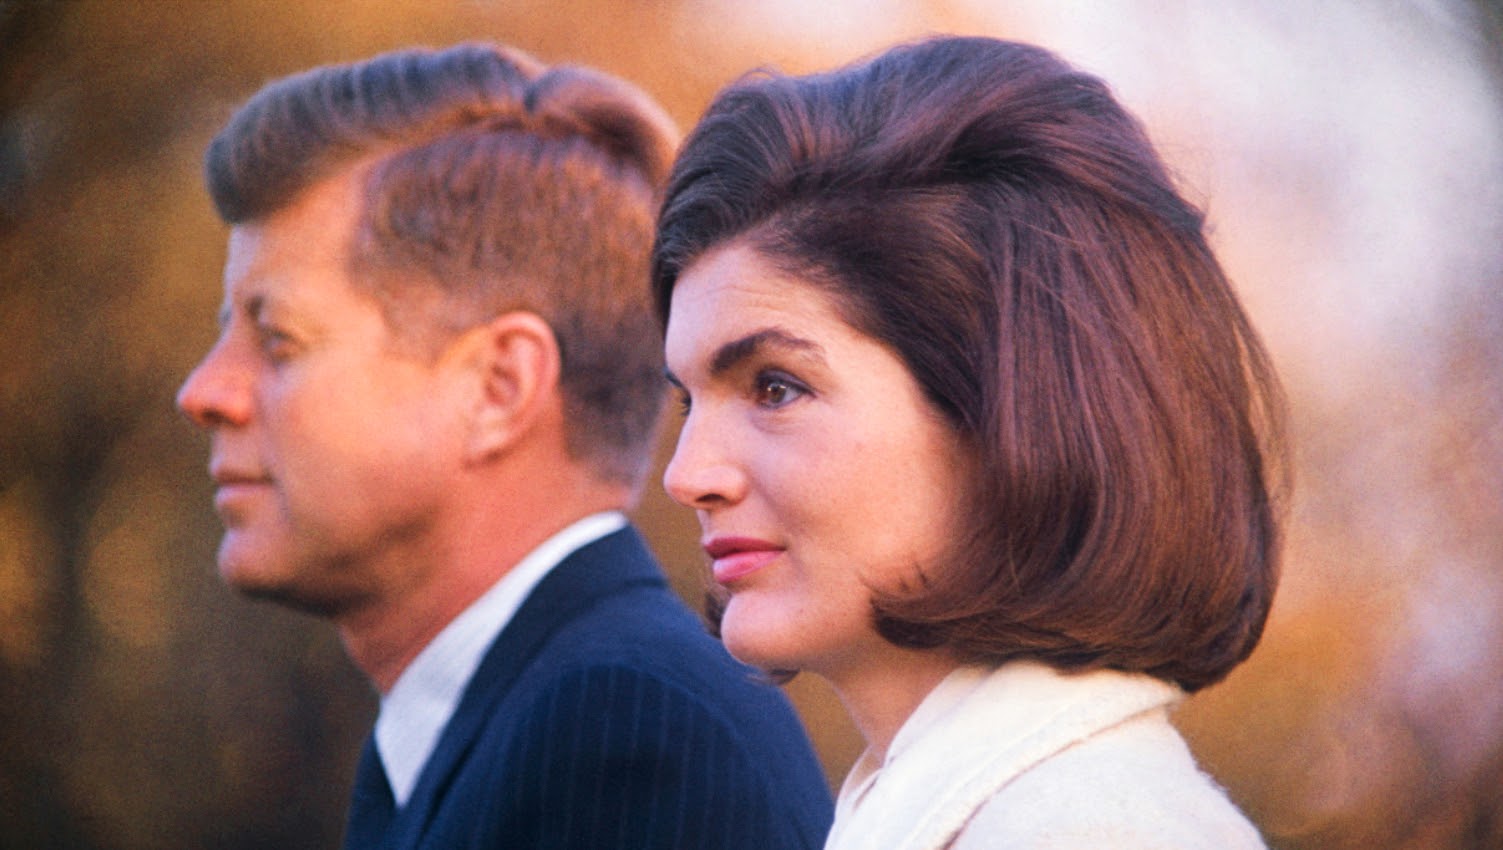 JFK and First Lady Jackie Kennedy